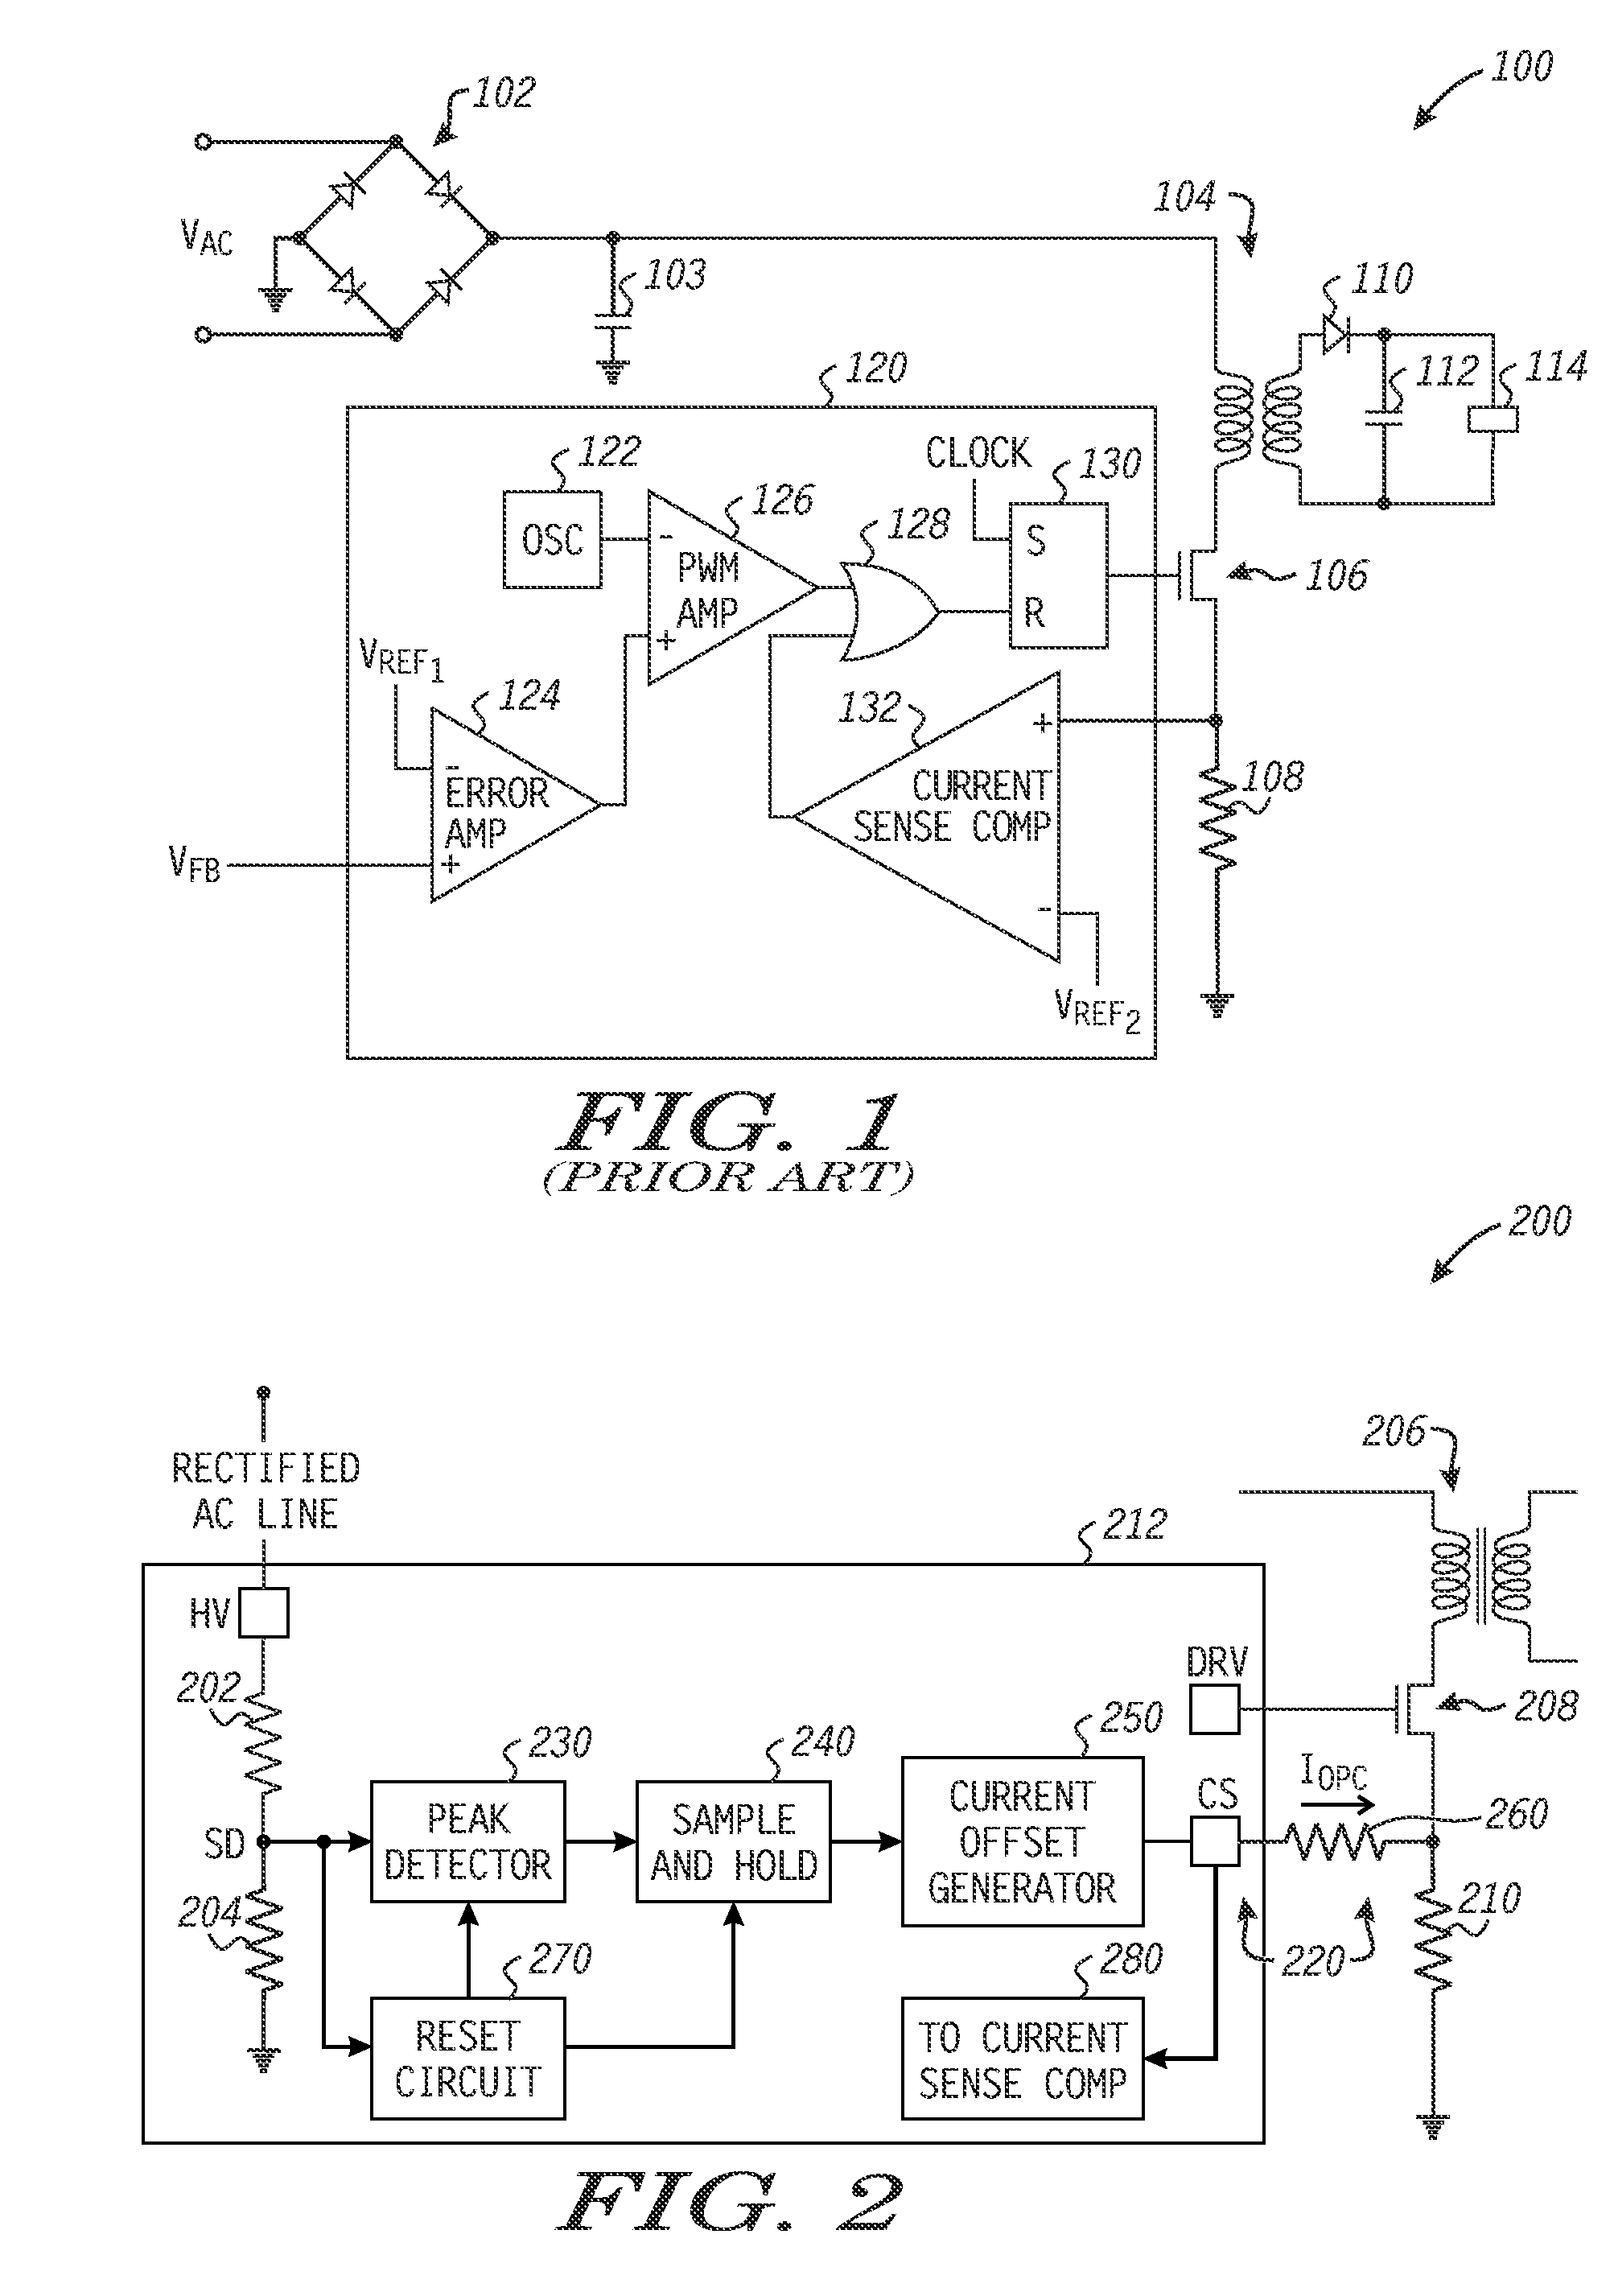 Over power compensation in switched mode power supplies